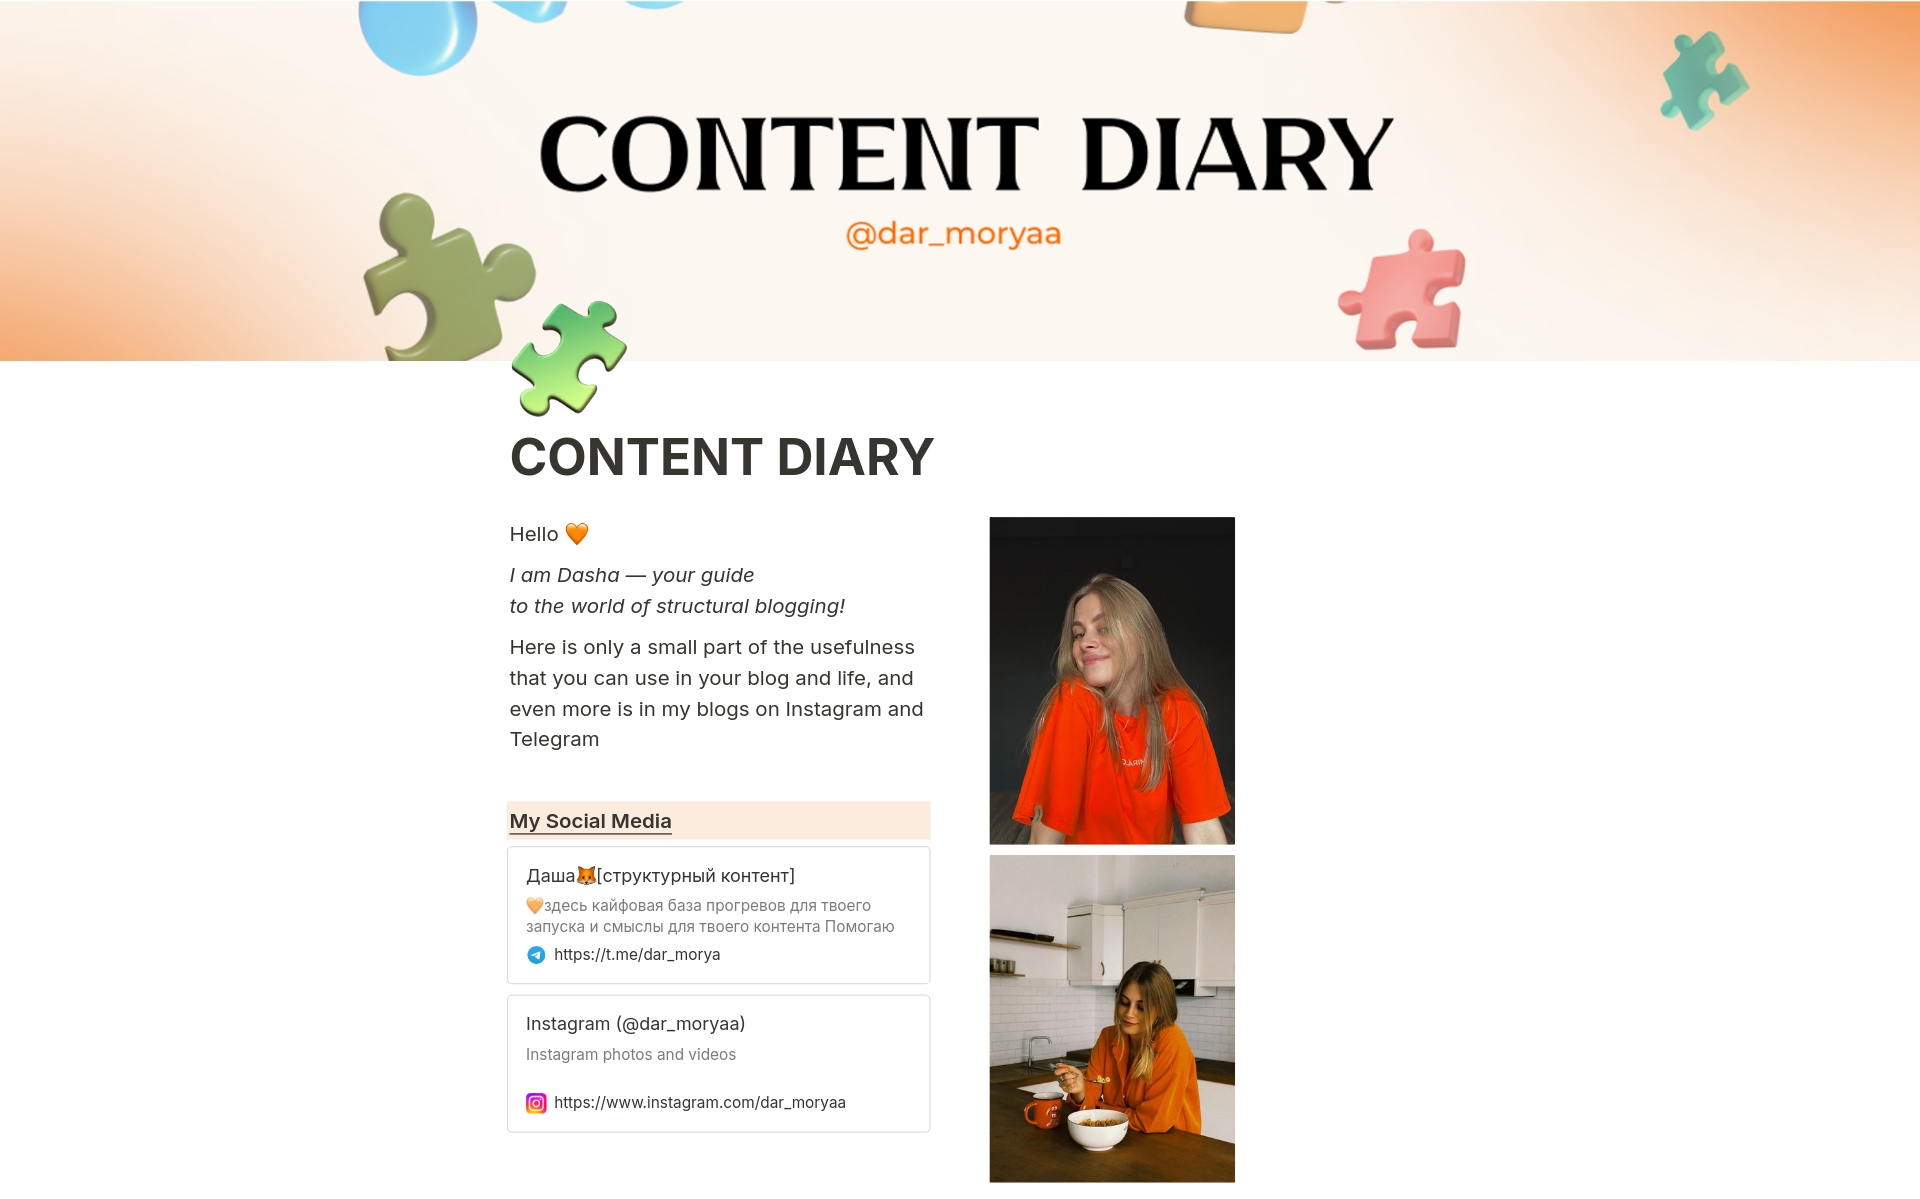 This template helps people who have a blog to organize their content better for getting better results
Make content in several social media platforms at the same time using this diary